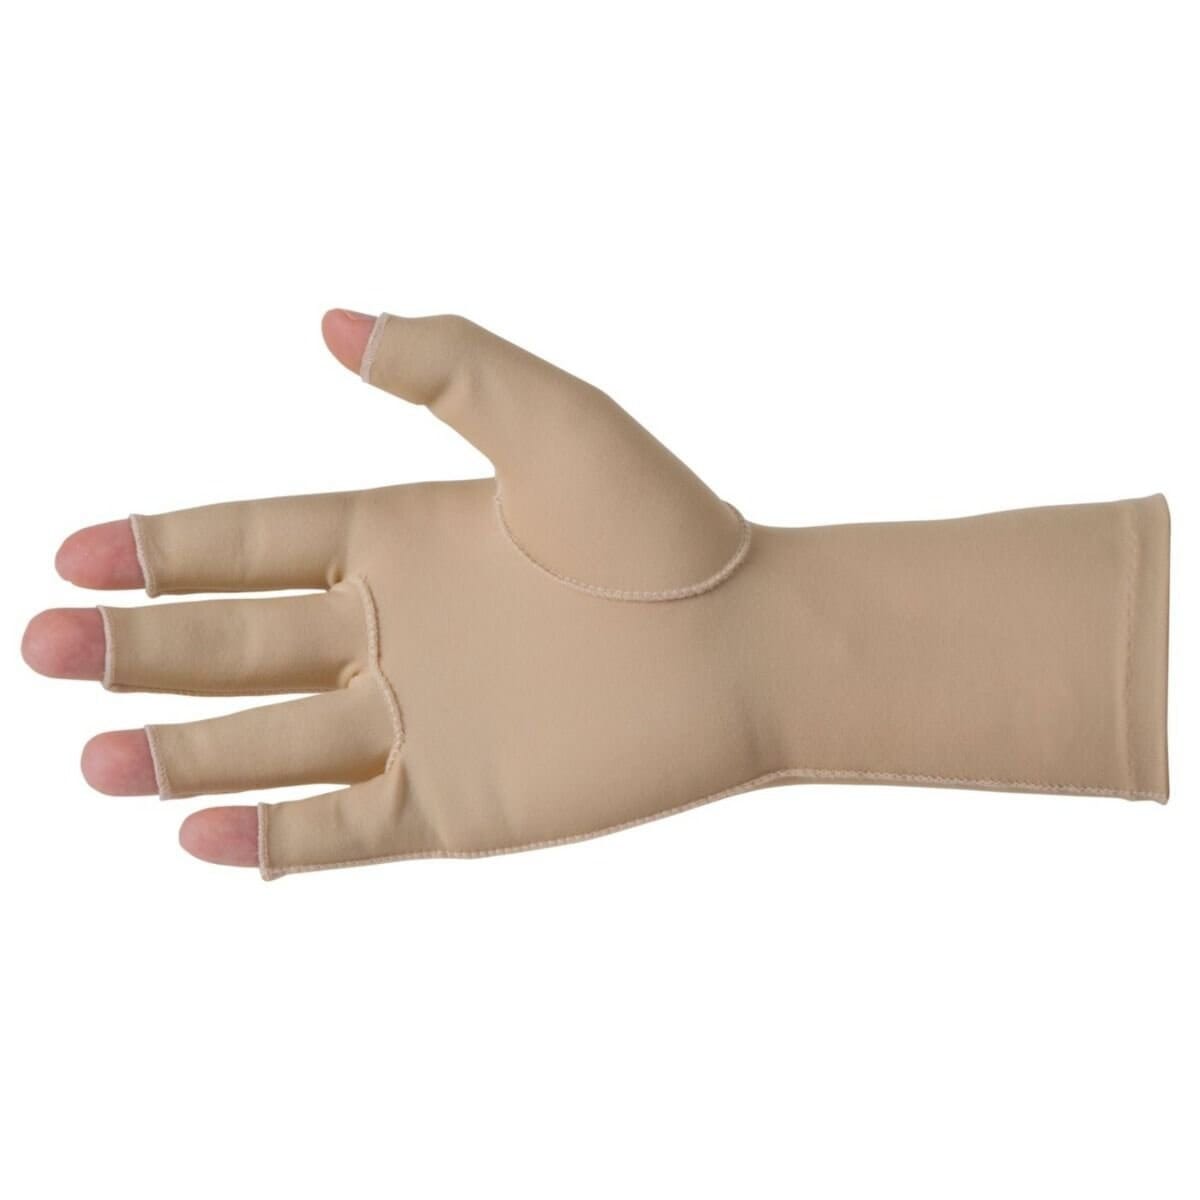 View Compression Hatch Oedema Glove Open Finger Right Extra Small information